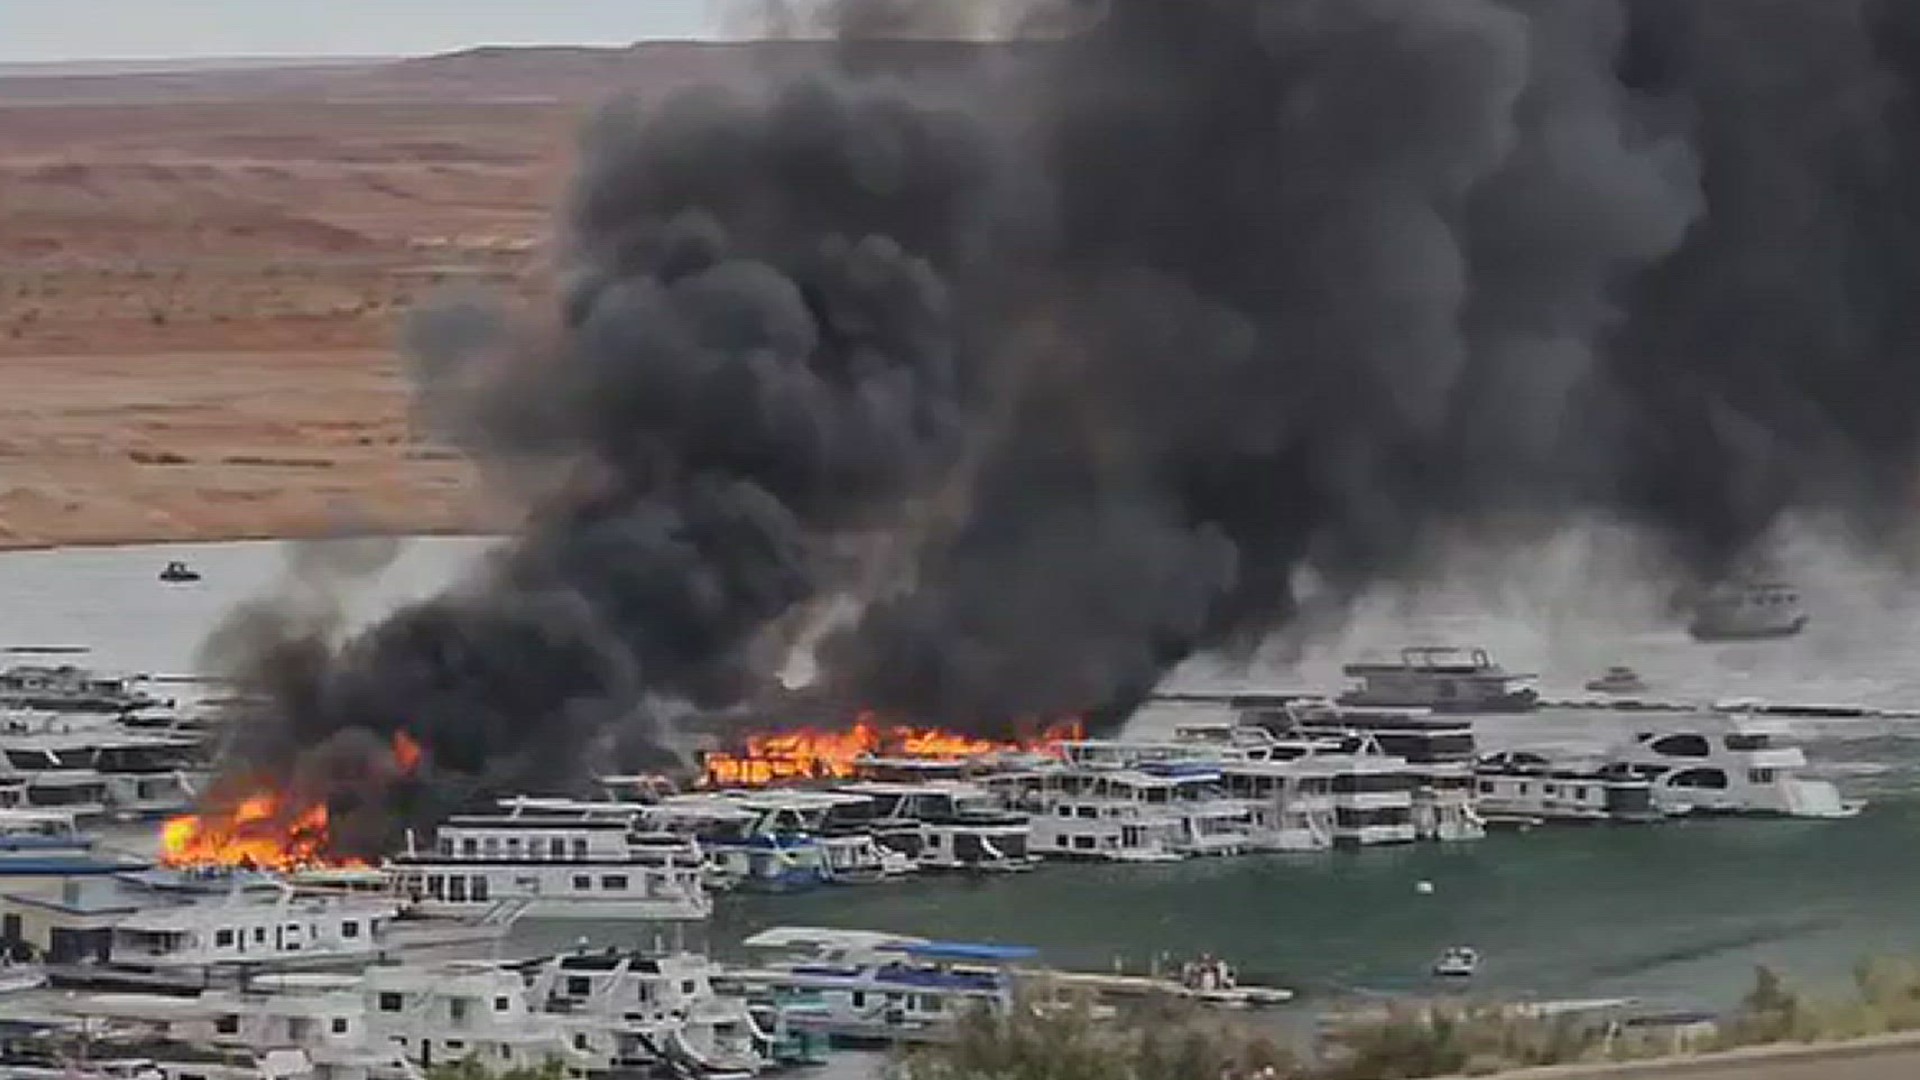 The fires were reported at Lake Powell's Wahweap Marina on Friday.